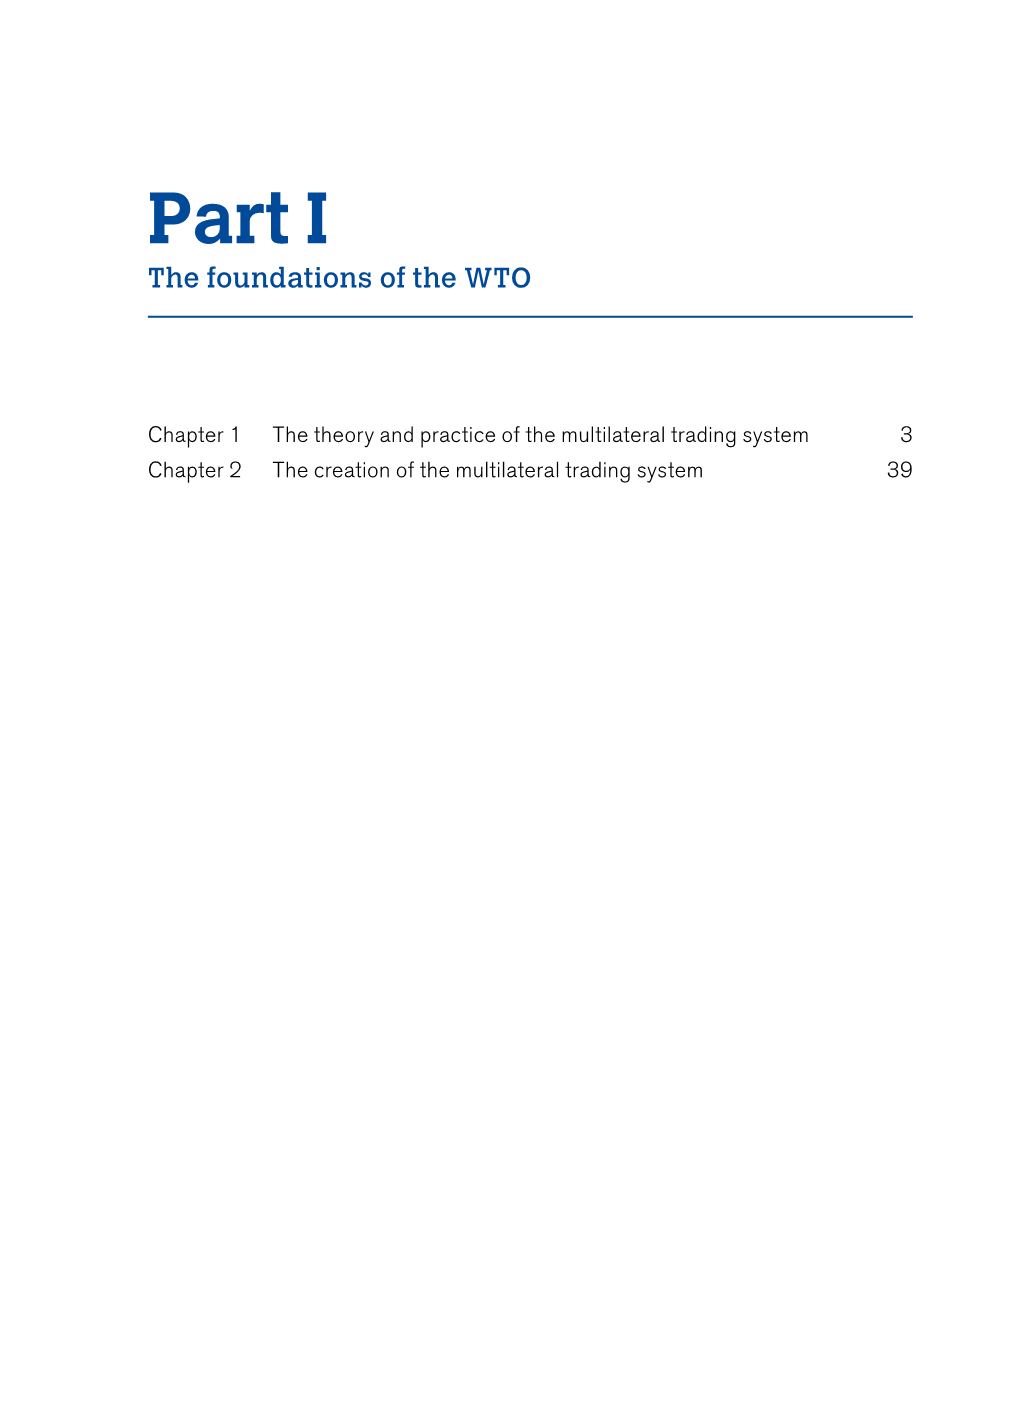 Part I the Foundations of the WTO